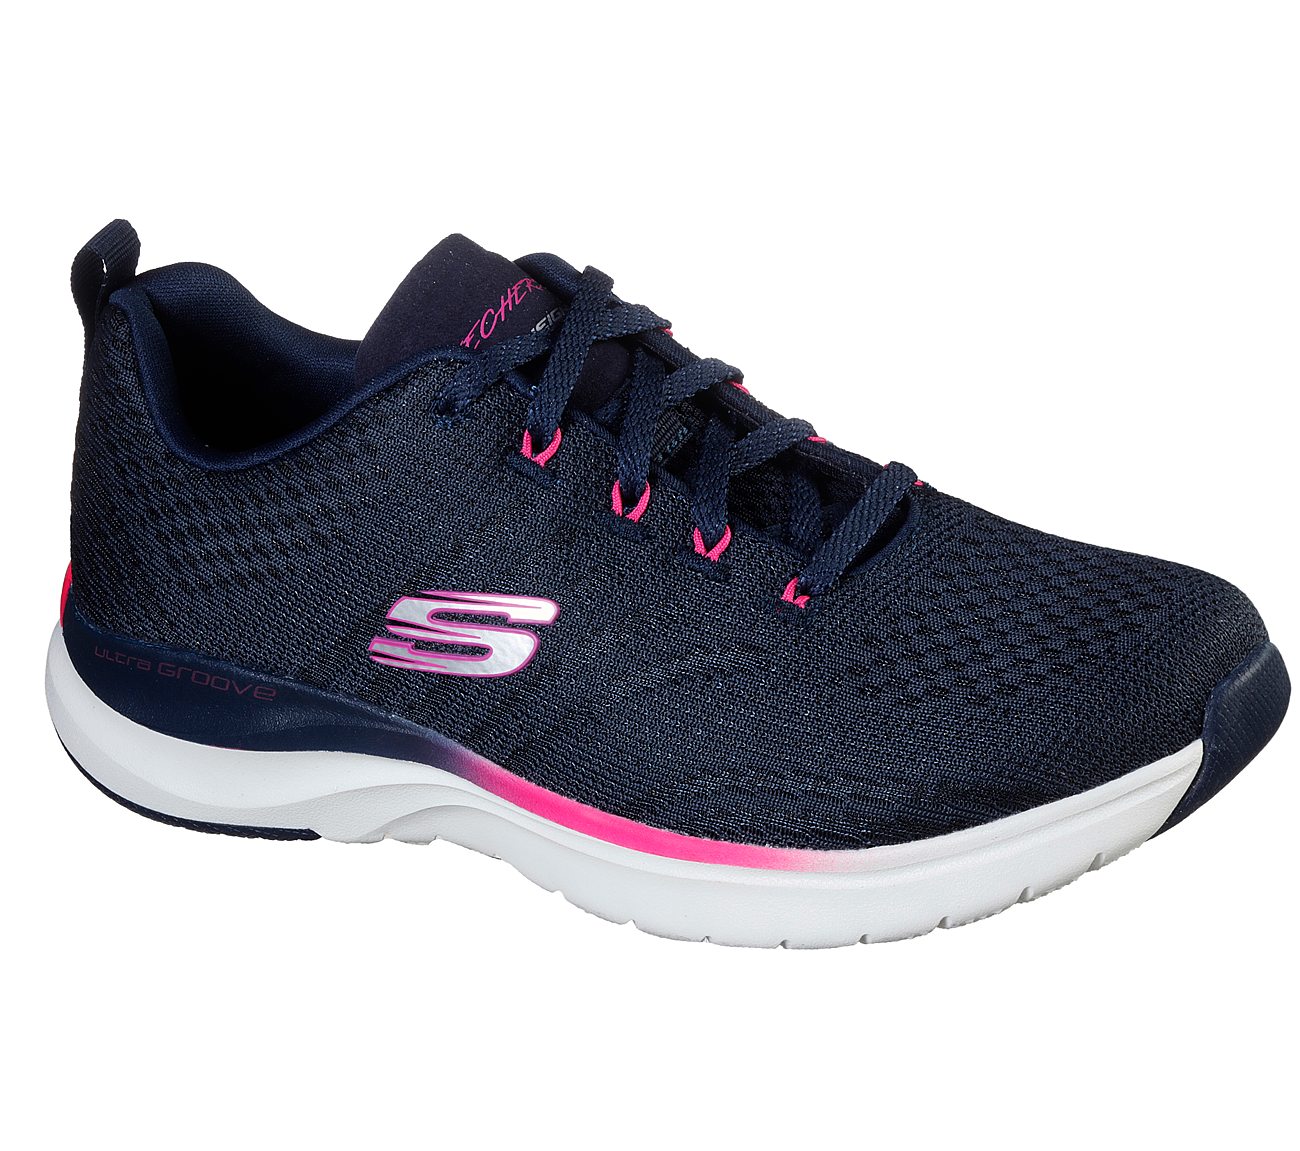 Buy Skechers ULTRA GROOVE PURE VISION Women